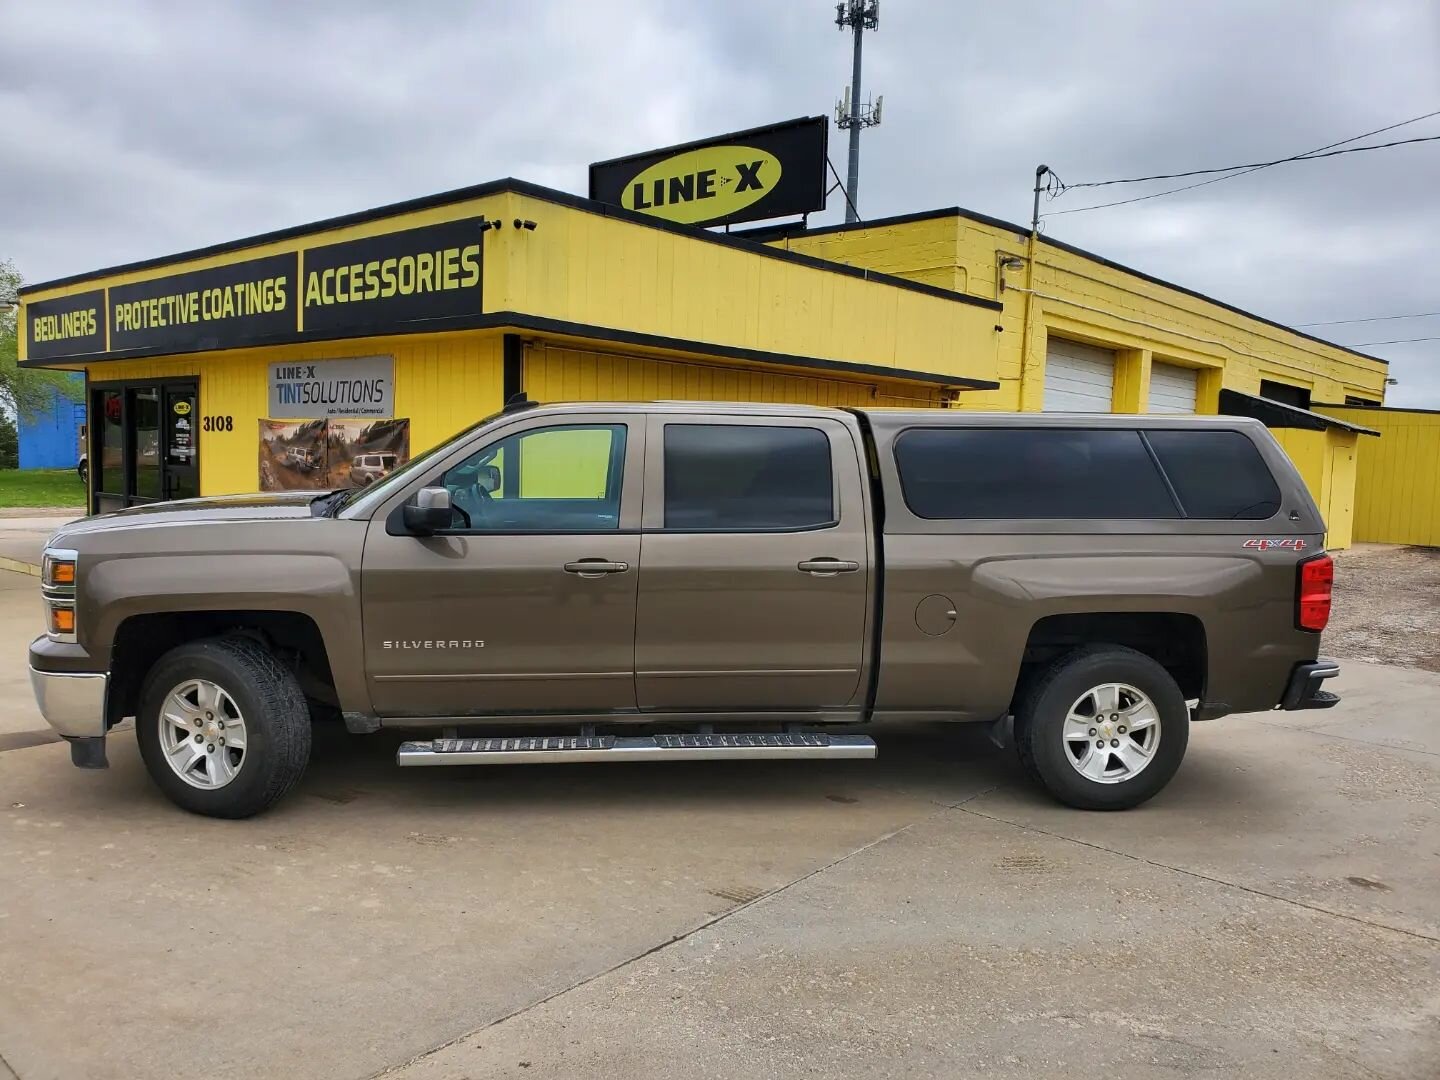 Man, Silverados sure do look nice...especially with our caps on them! What do you think? 

100XL
👉 Cab High
👉 Dual LED Tube Lights
👉 Rear Hatch Prop Switch For Lights
👉 Optional Keyless Entry
👉 Color Match
👉 Frame Flapper Windows

We are your L